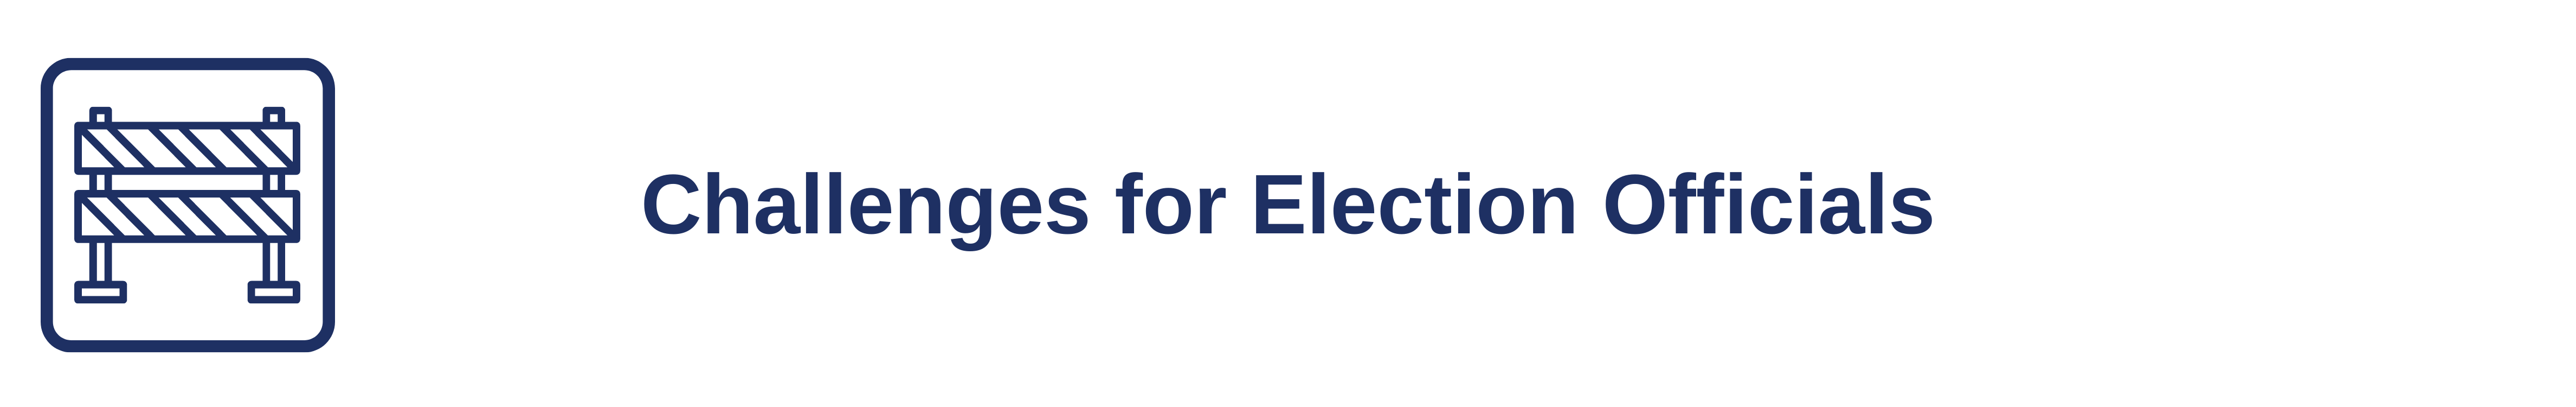 Challenges for Election Officials